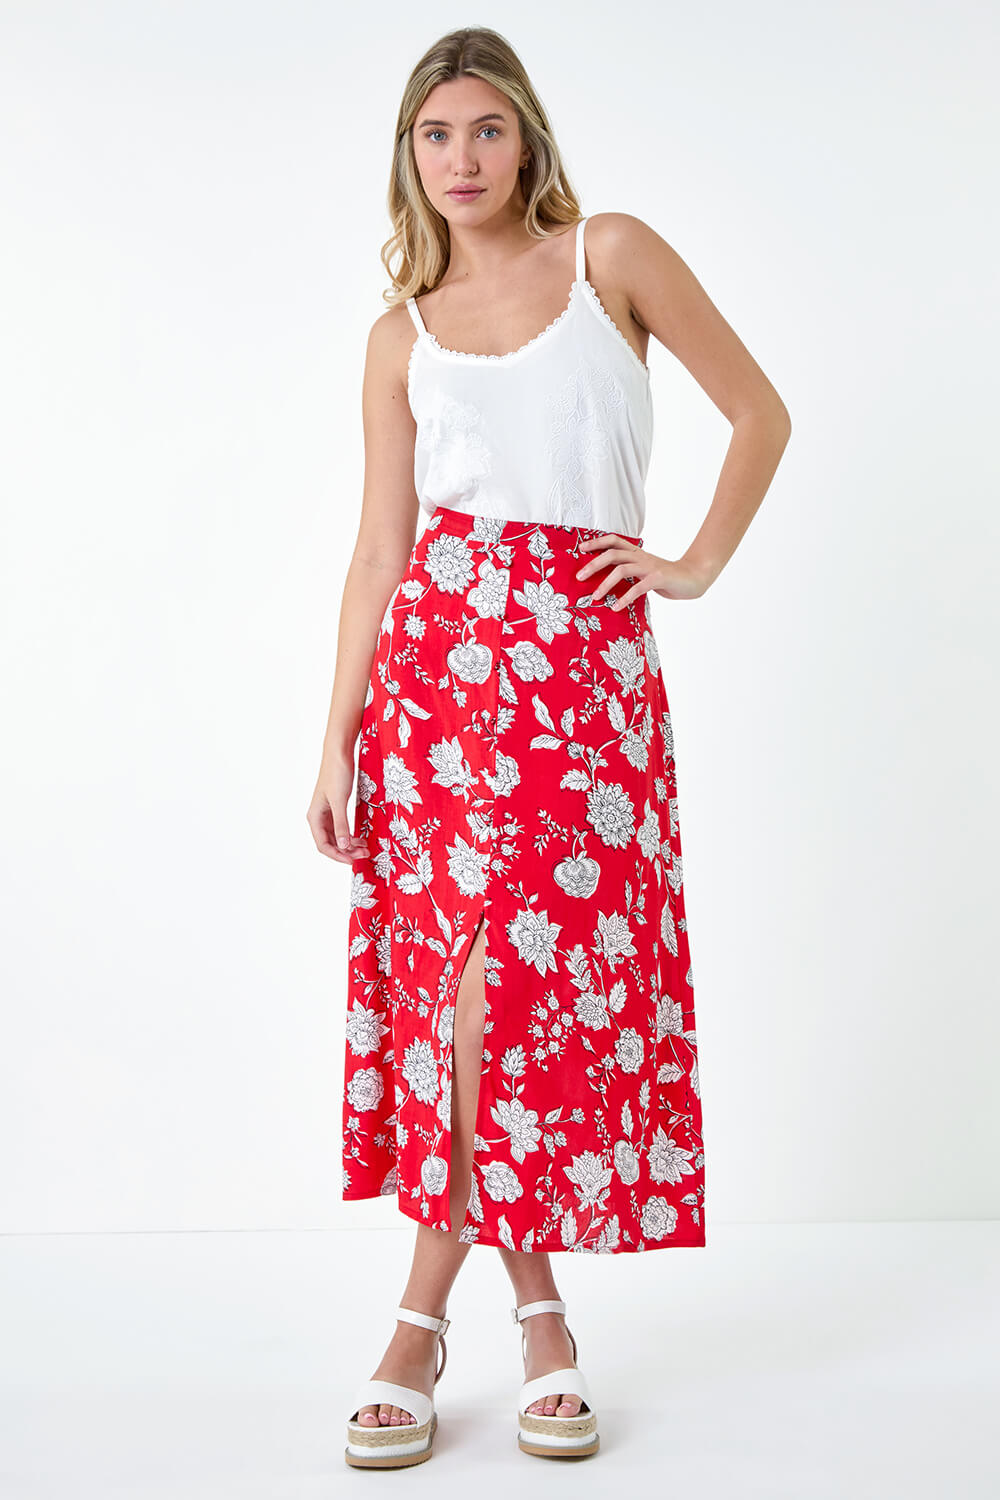 CORAL Floral Button Detail Midi Skirt, Image 3 of 5